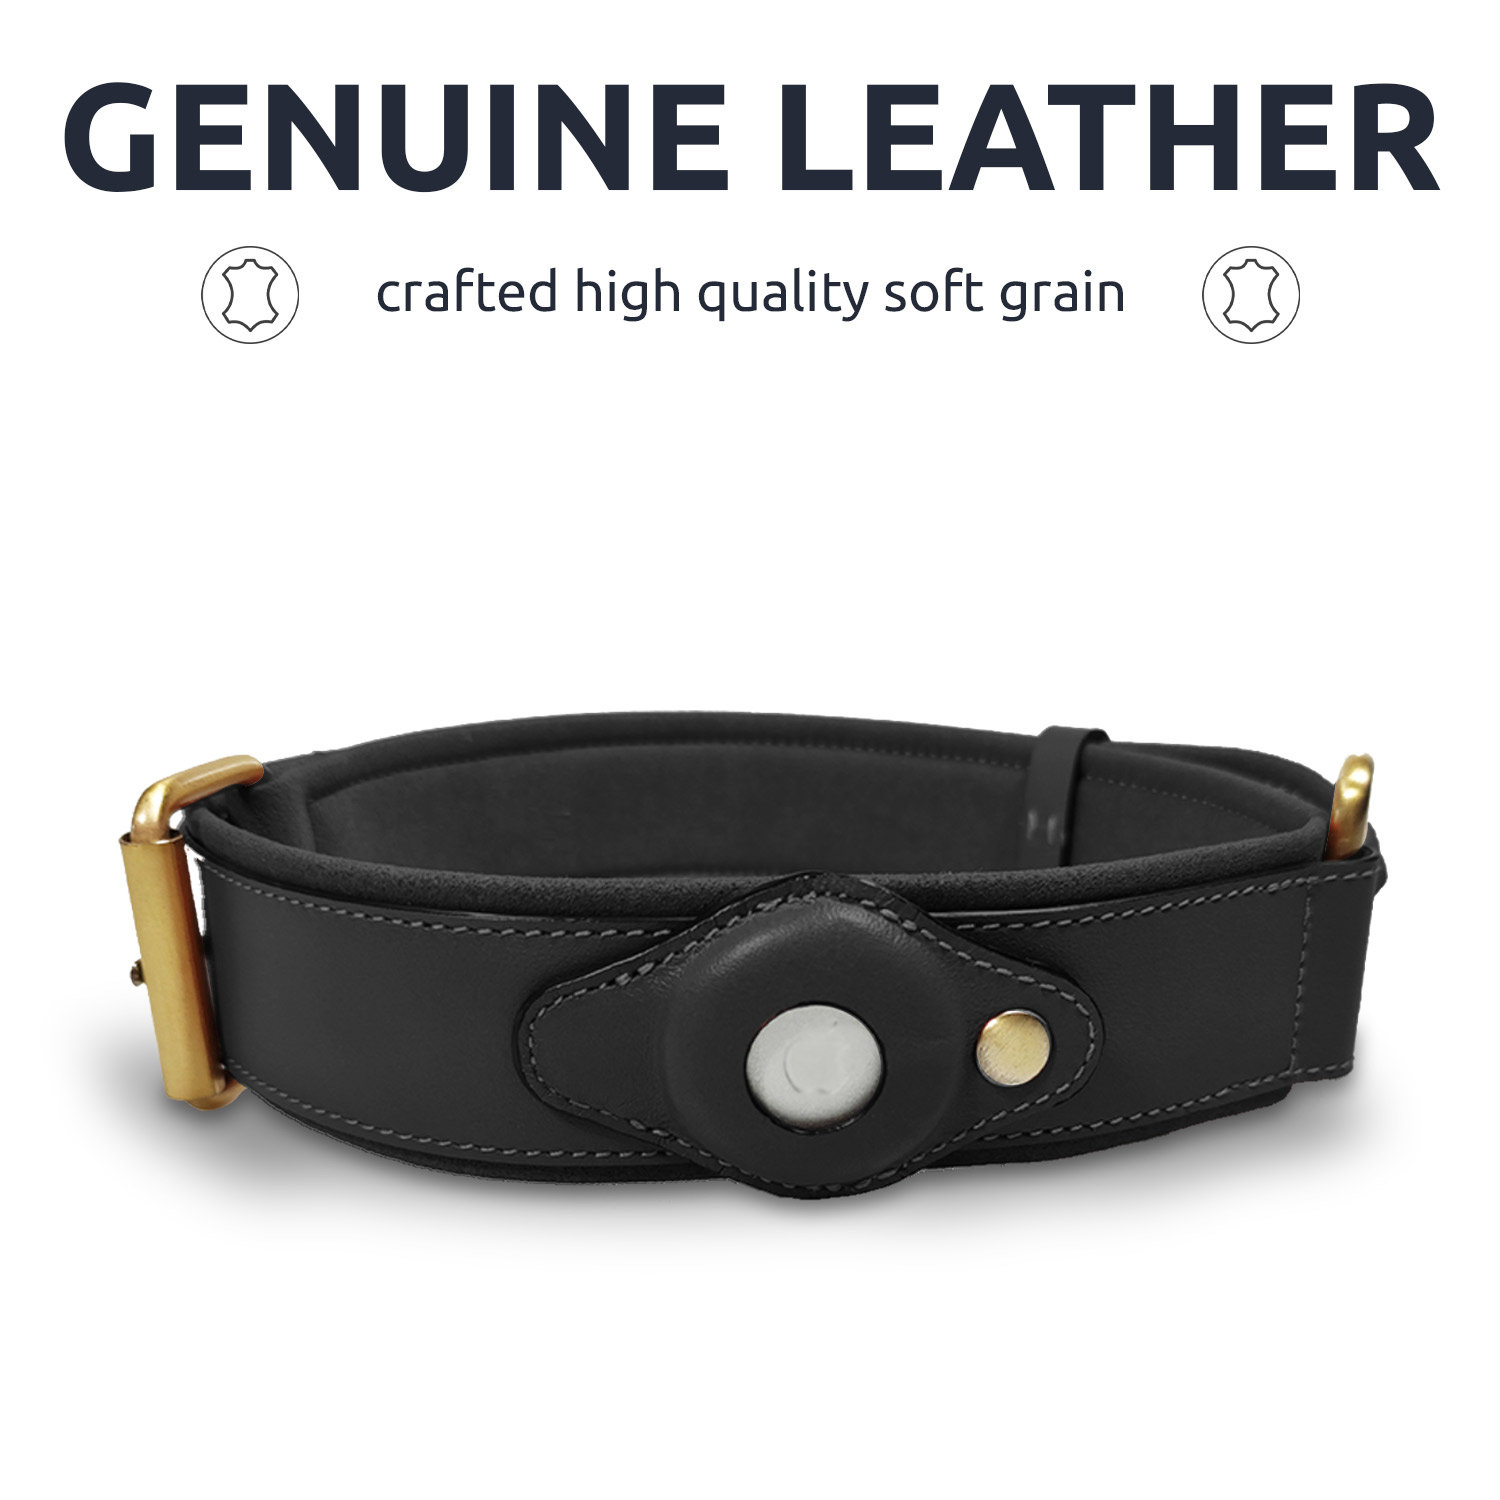 https://images.mobilefun.co.uk/graphics/productmisc/86144/Olixar_Genuine_Leather_Apple-AirTags_Dog_Collar_Small_Black_Gallery.2.jpg